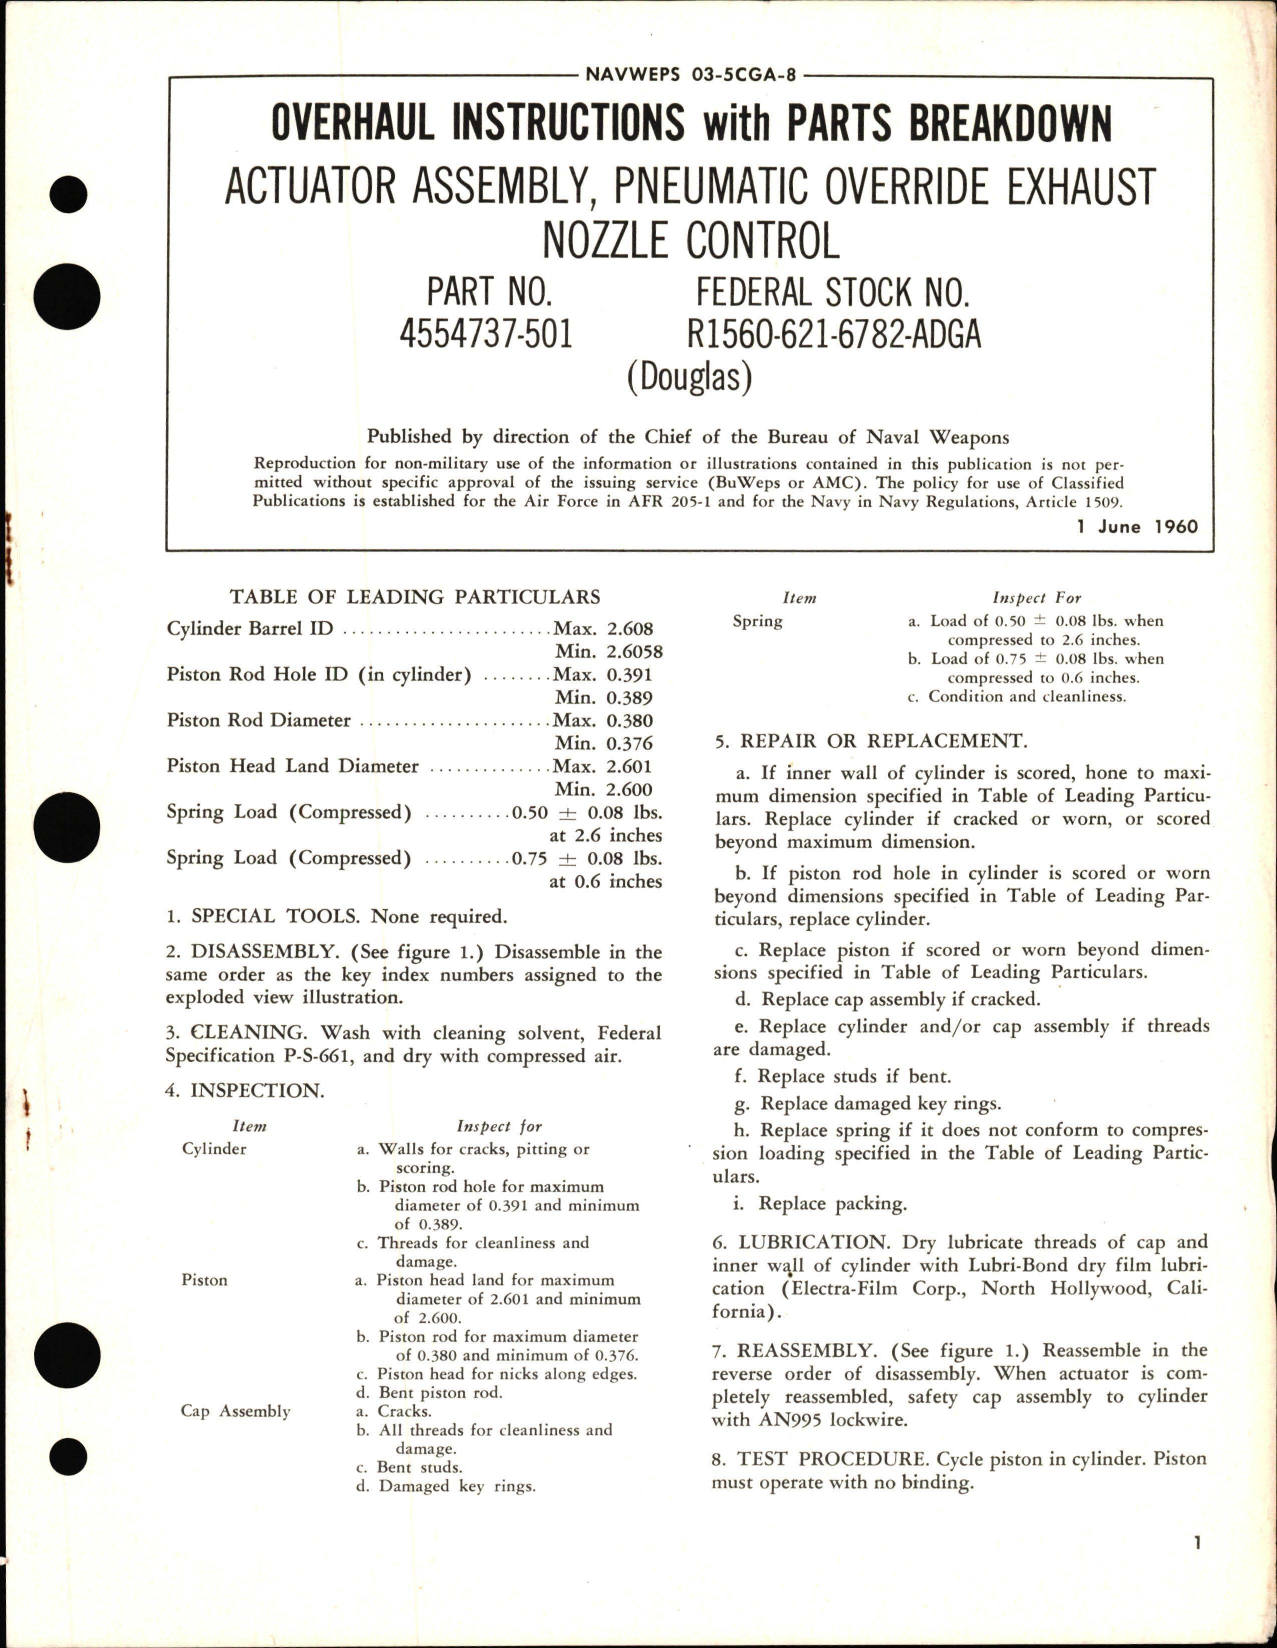 Sample page 1 from AirCorps Library document: Overhaul Instructions with Parts Breakdown for Actuator Assembly, Pneumatic Override Exhaust Nozzle Control - Part 4554737-501